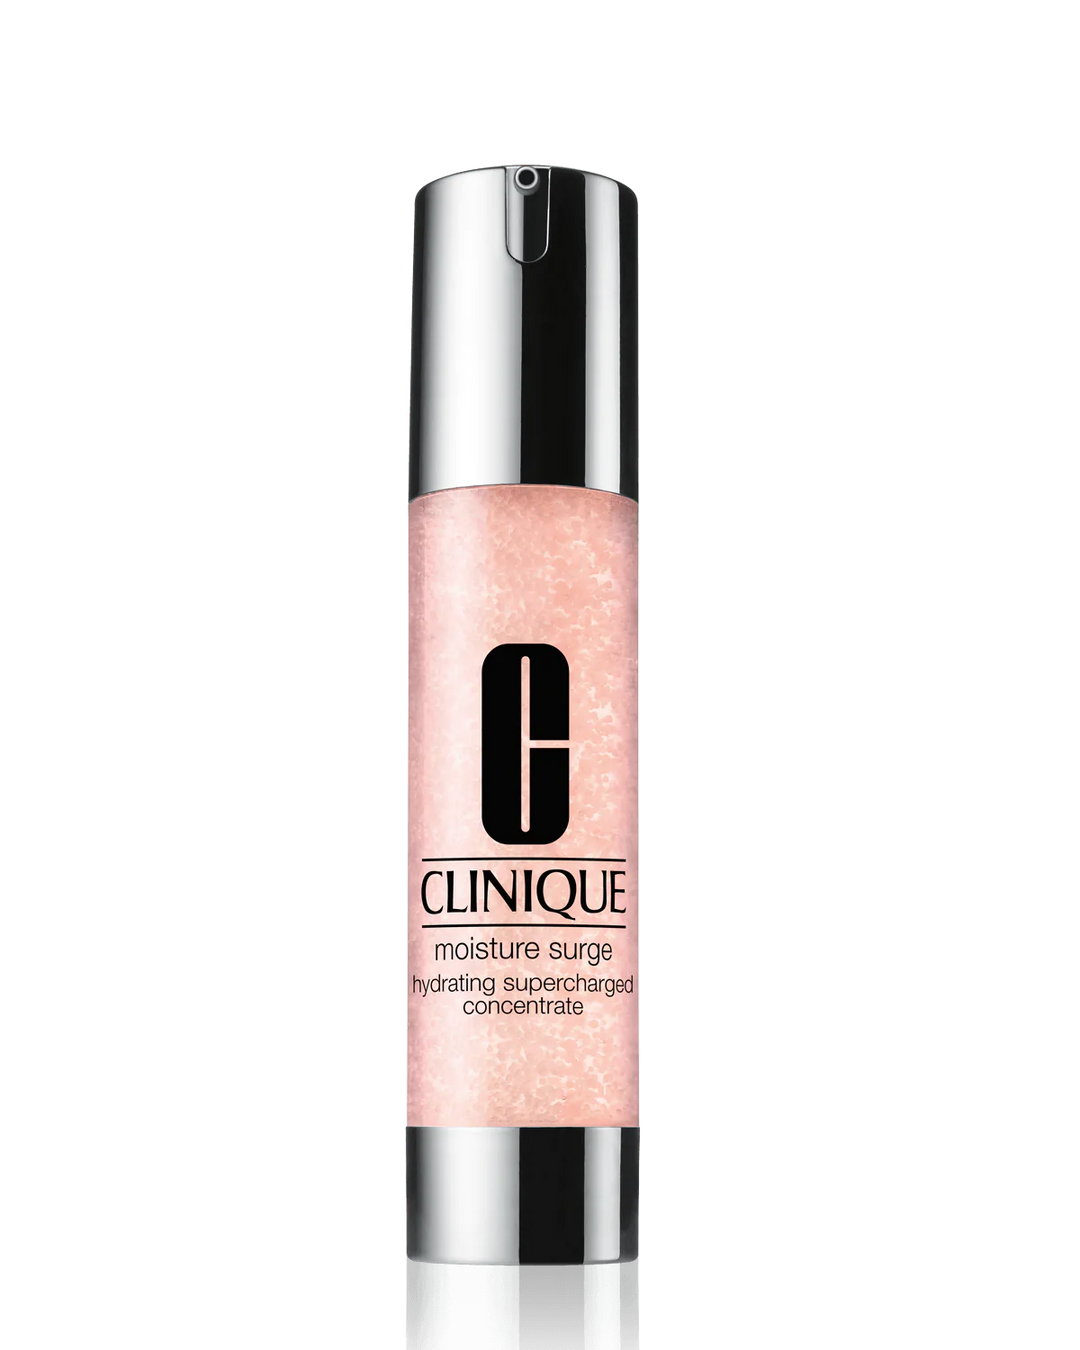 Shop The Latest Collection Of Clinique Moisture Surge Hydrating Supercharged Concentrate In Lebanon